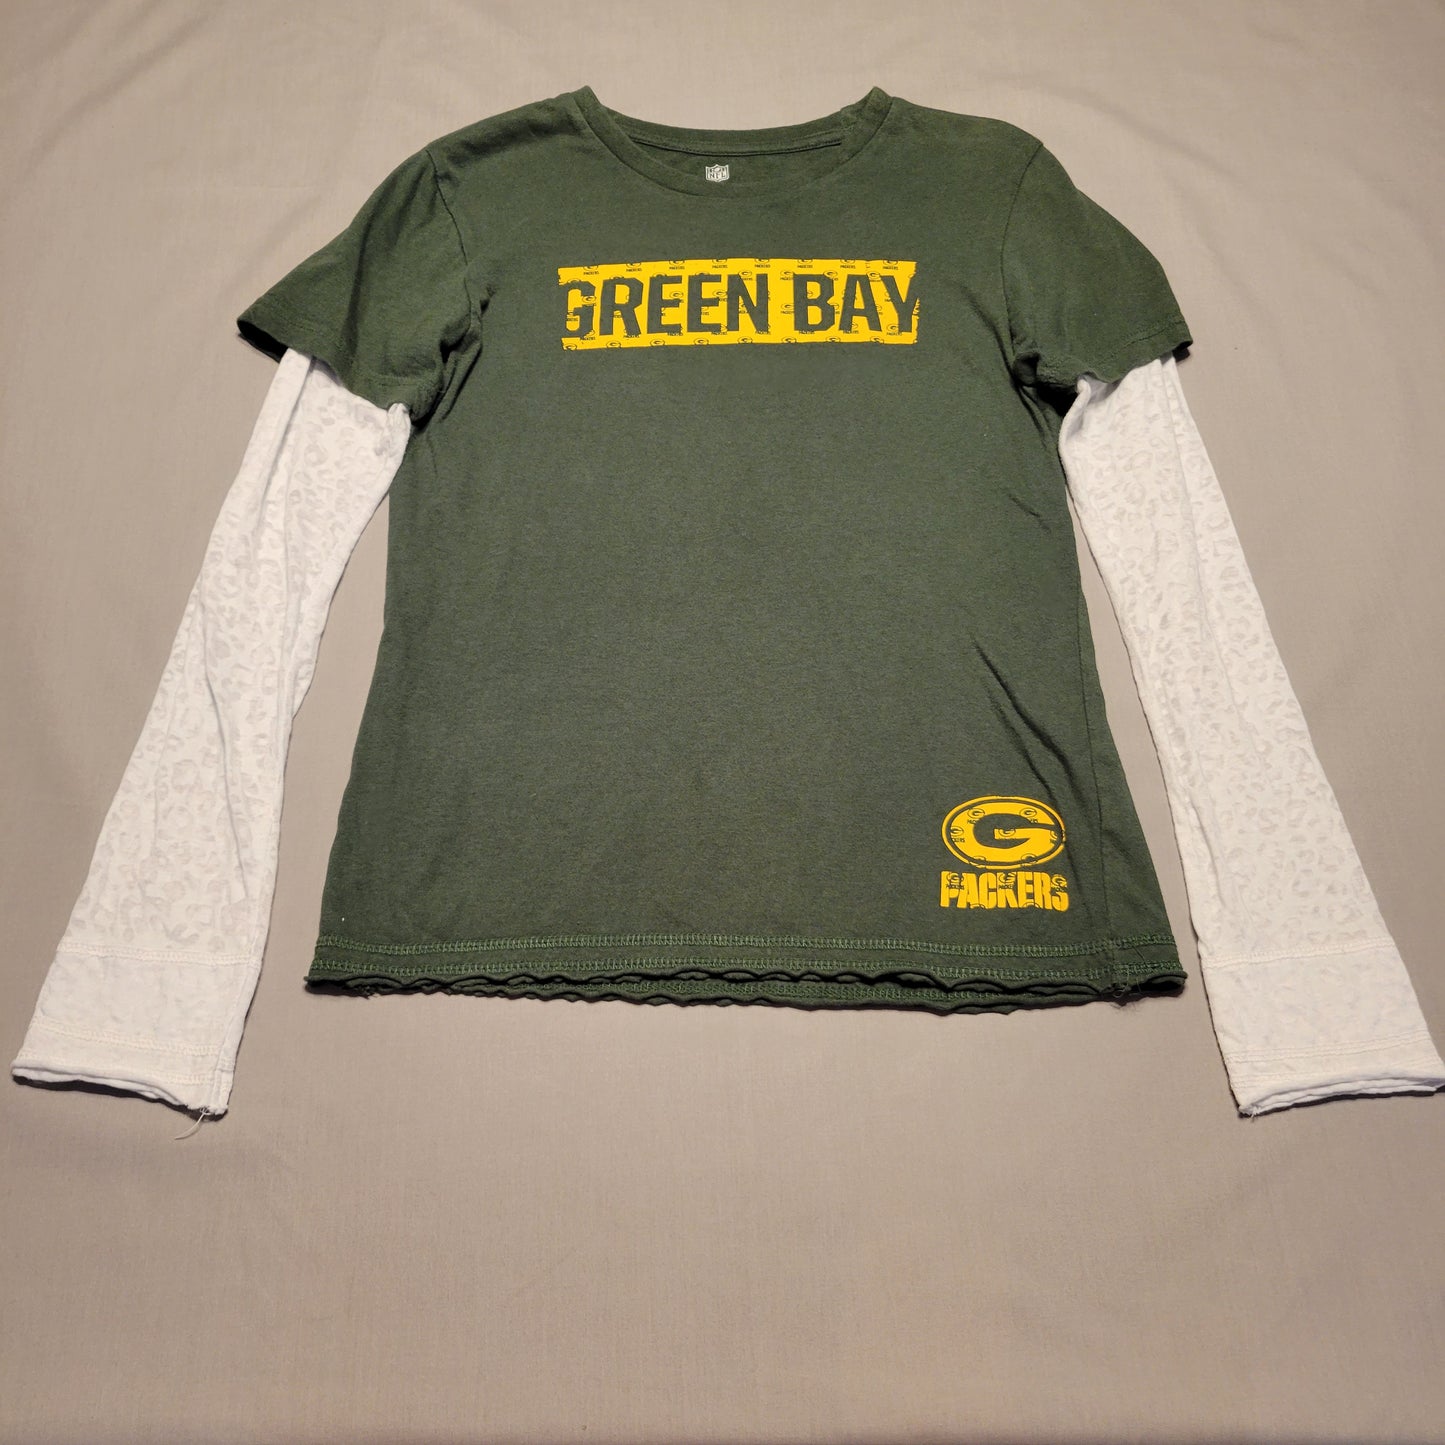 Pre-Owned Junior's Girl Extra Large (XL) Green Bay Packers Baseball Style T-Shirt